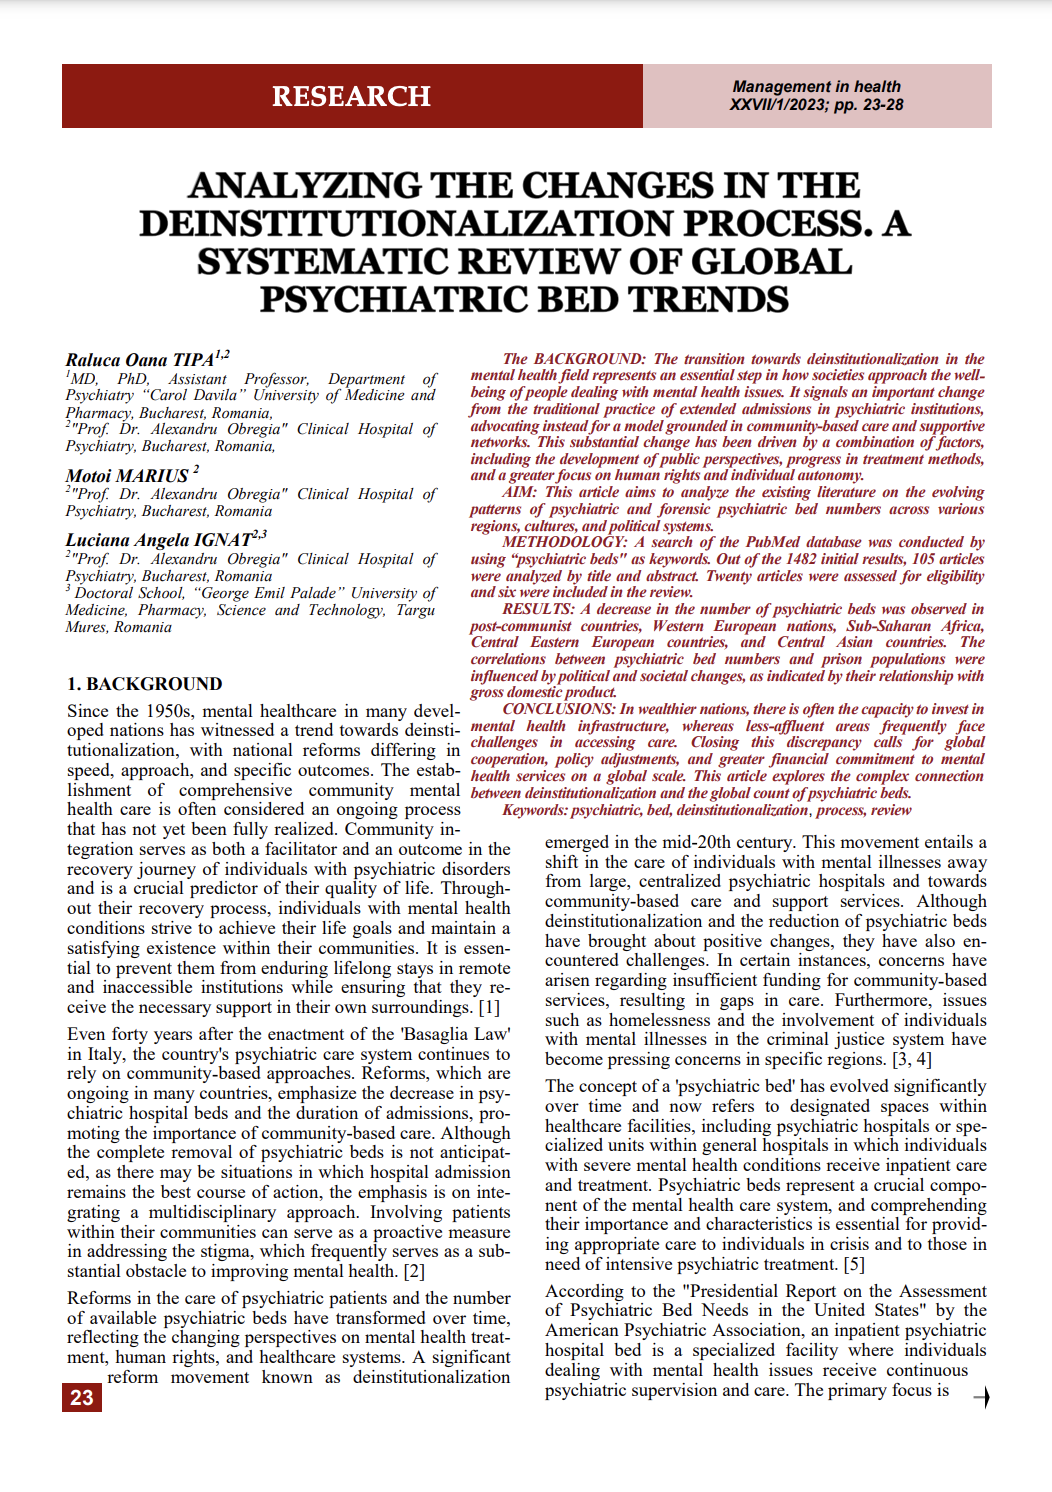 Analyzing the Changes in the Deinstitutionalization Process. A Systematic Review of Global Psychiatric Bed Trends